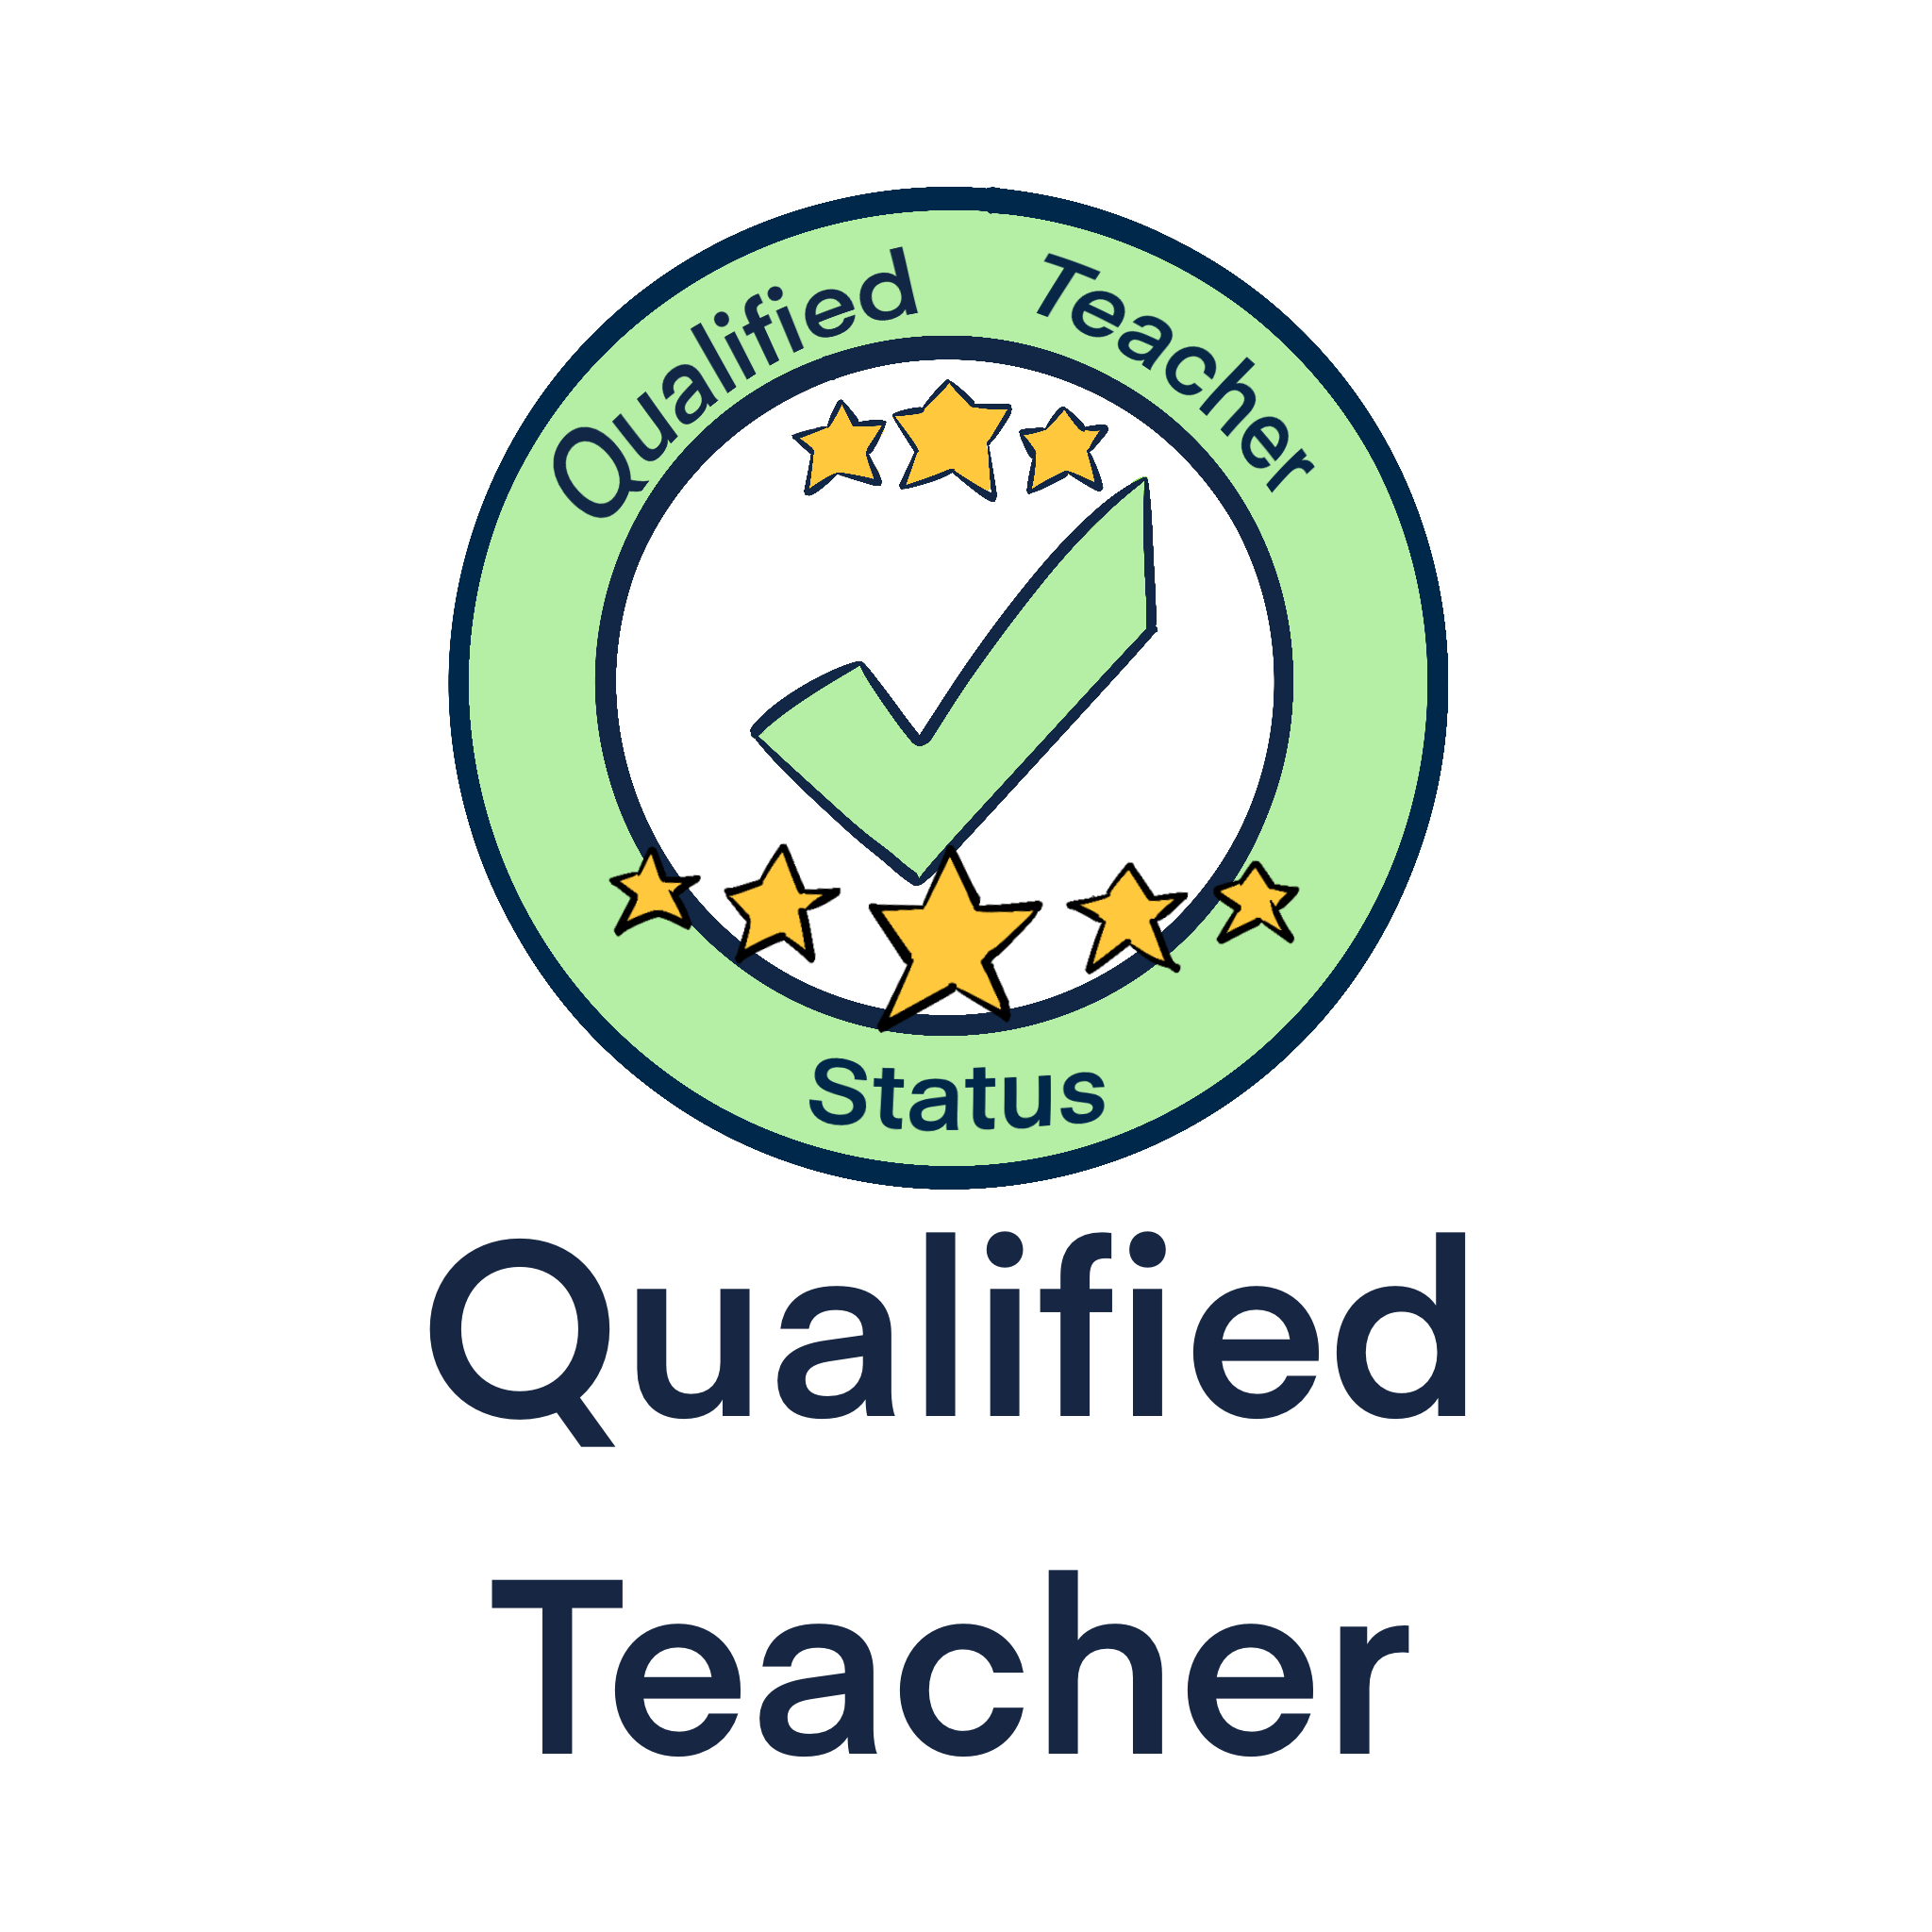 Like all our tutors, Meredith is a qualified teacher